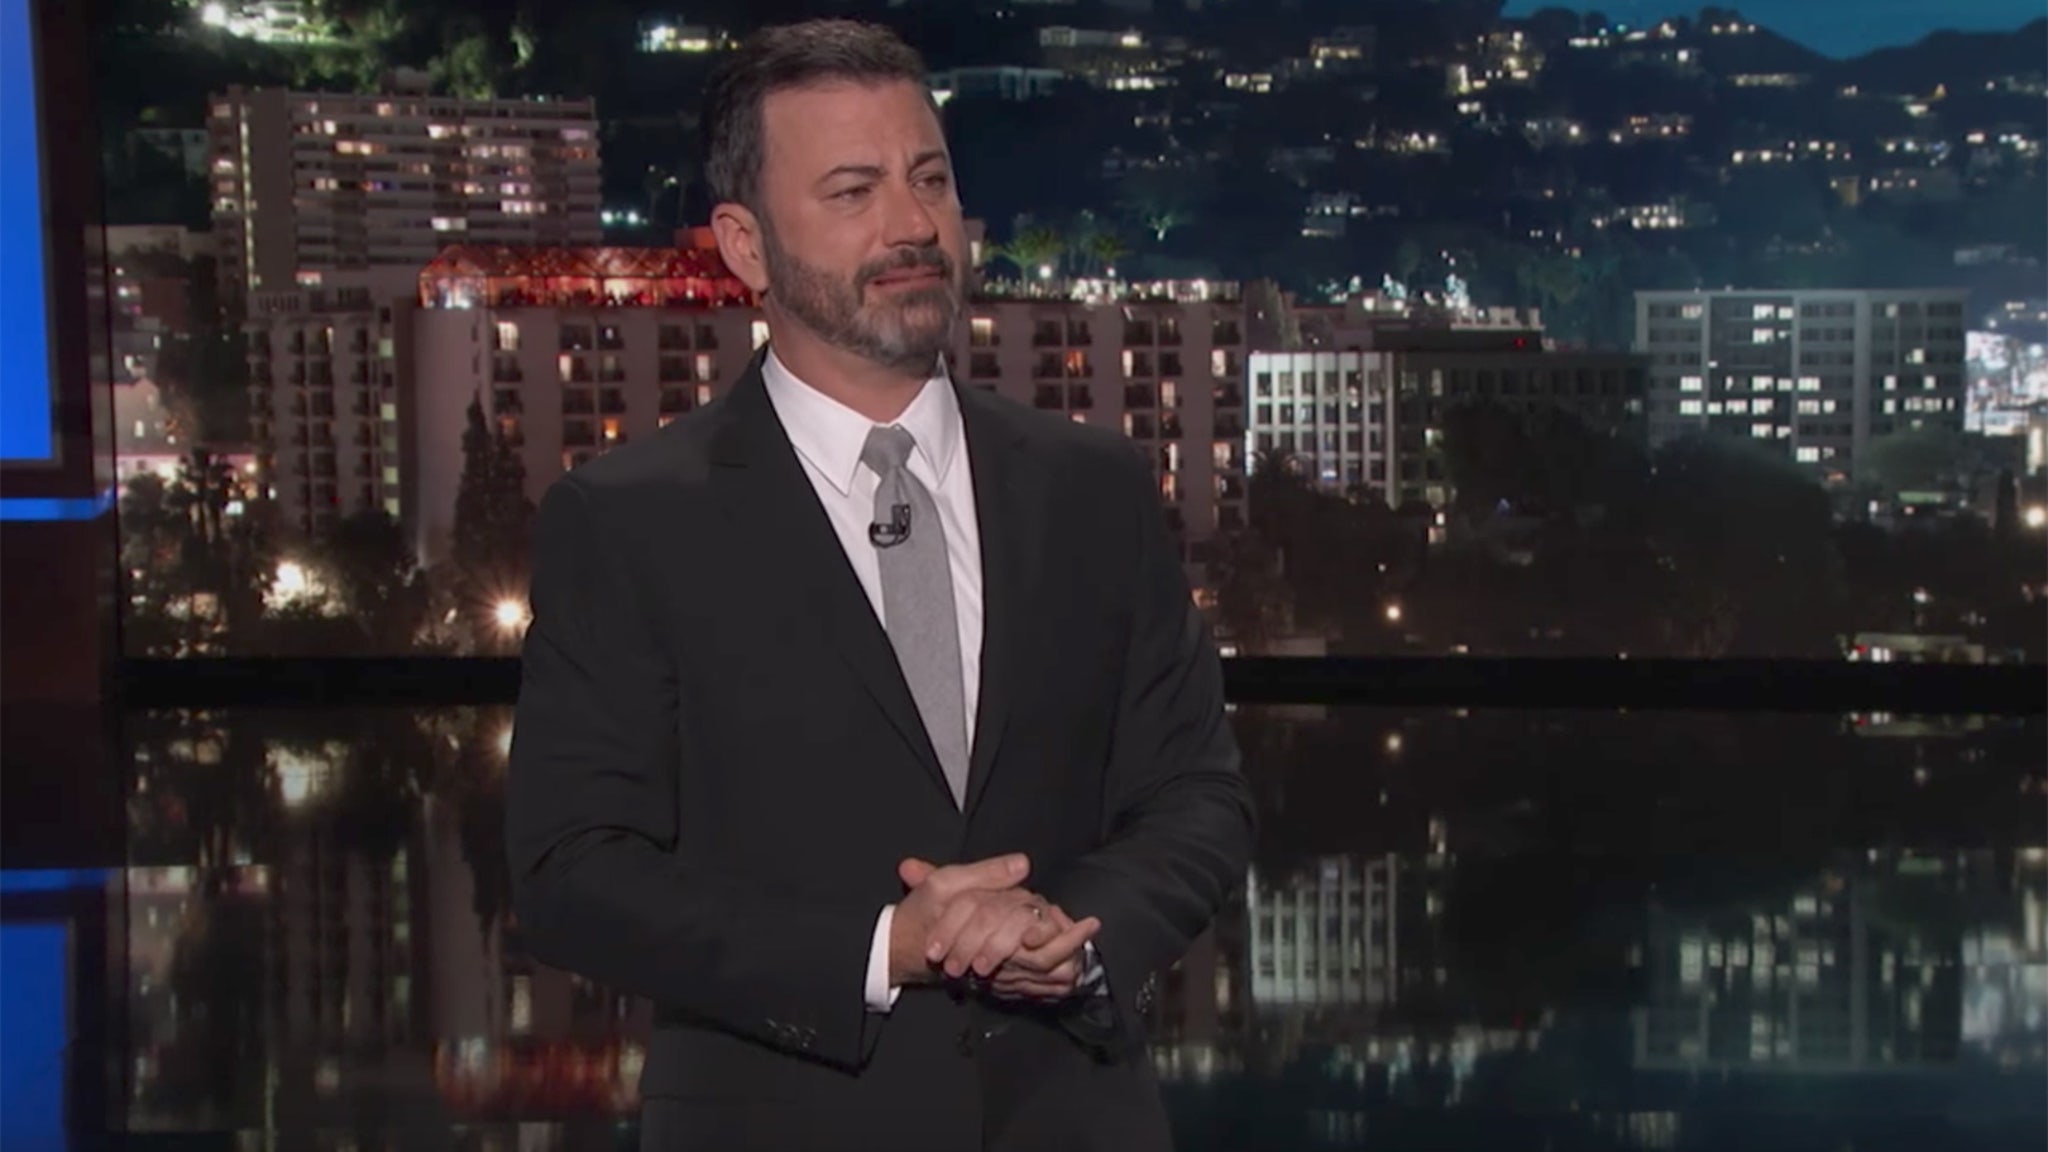 Jimmy Kimmel Chokes Up In Passionate Monologue After Las Vegas Shooting